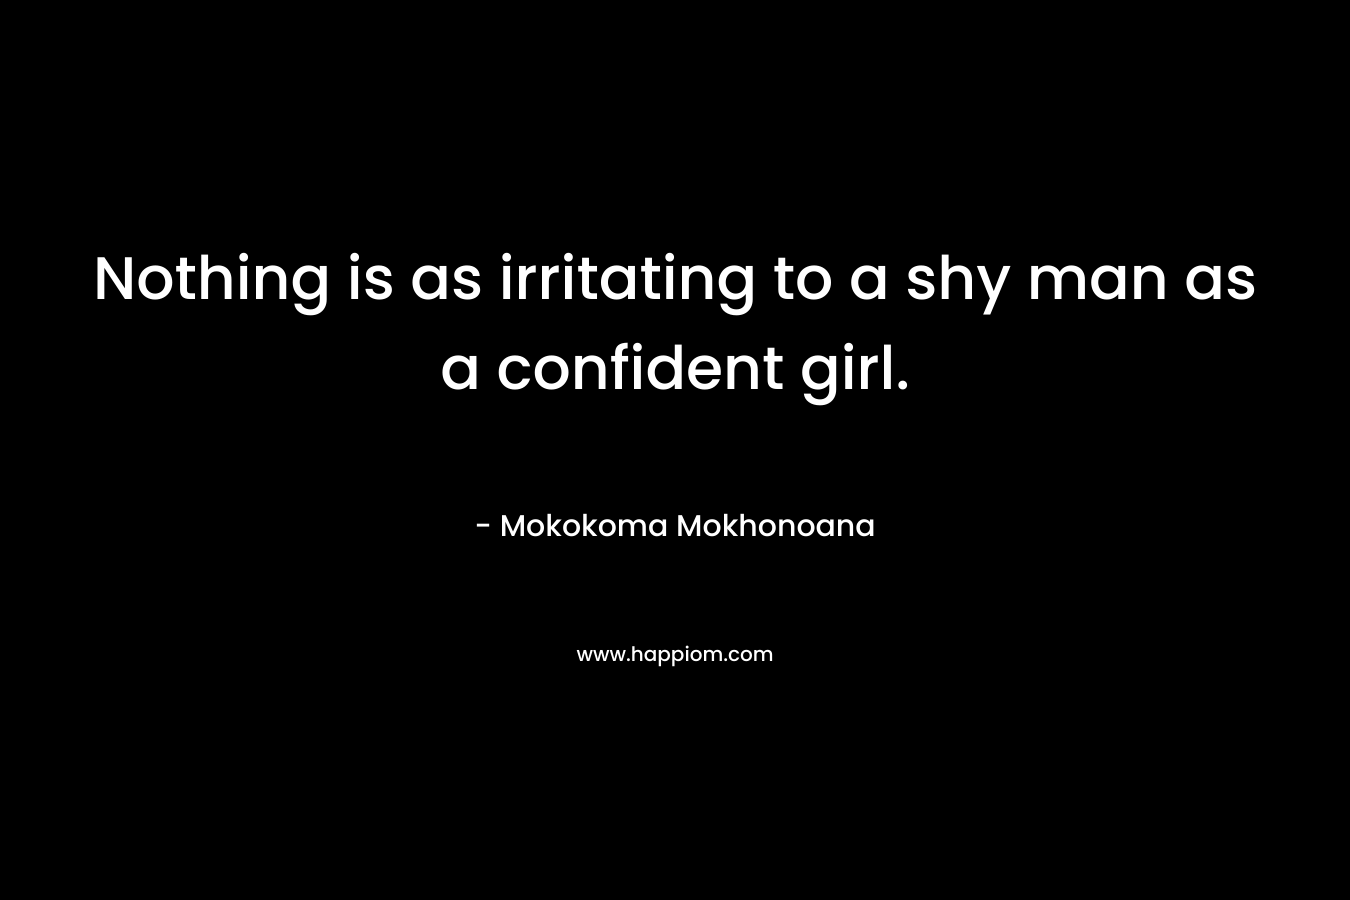 Nothing is as irritating to a shy man as a confident girl.